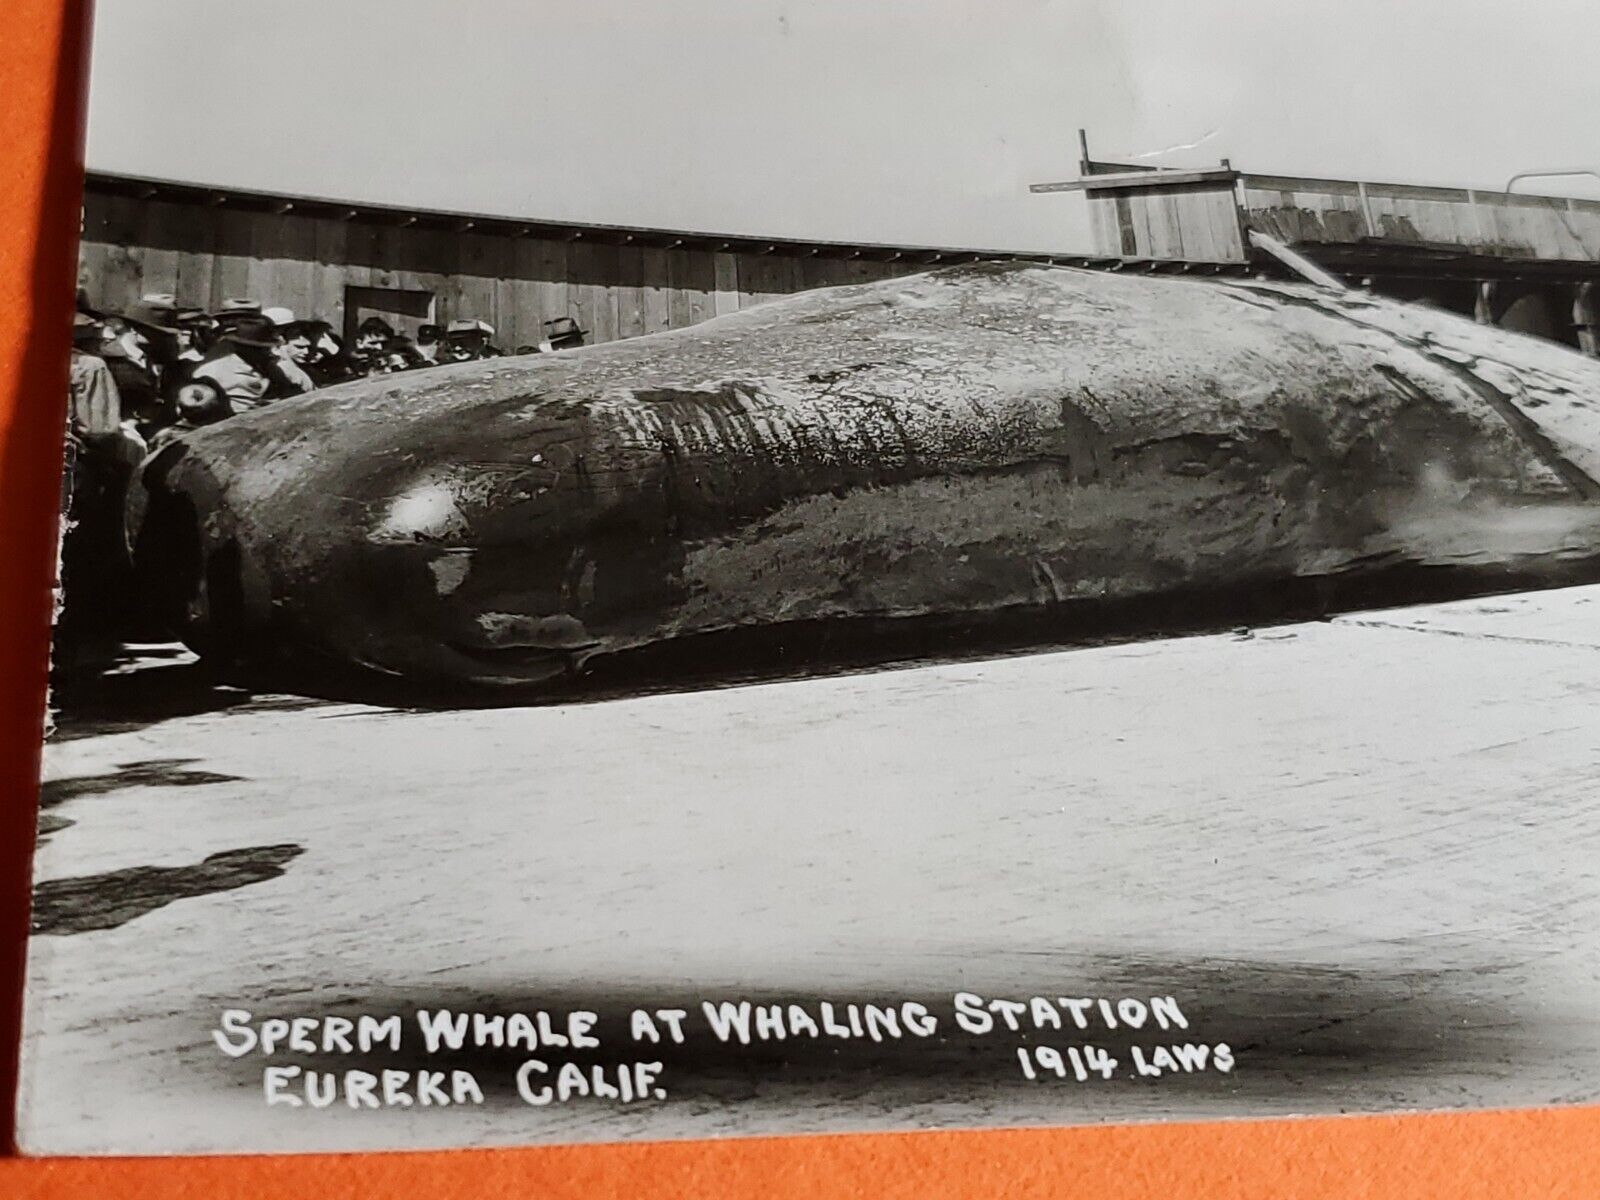 VTG Sperm Whale Caught RPPC Whaling Station Eureka CA. by Laws 1914 rph2